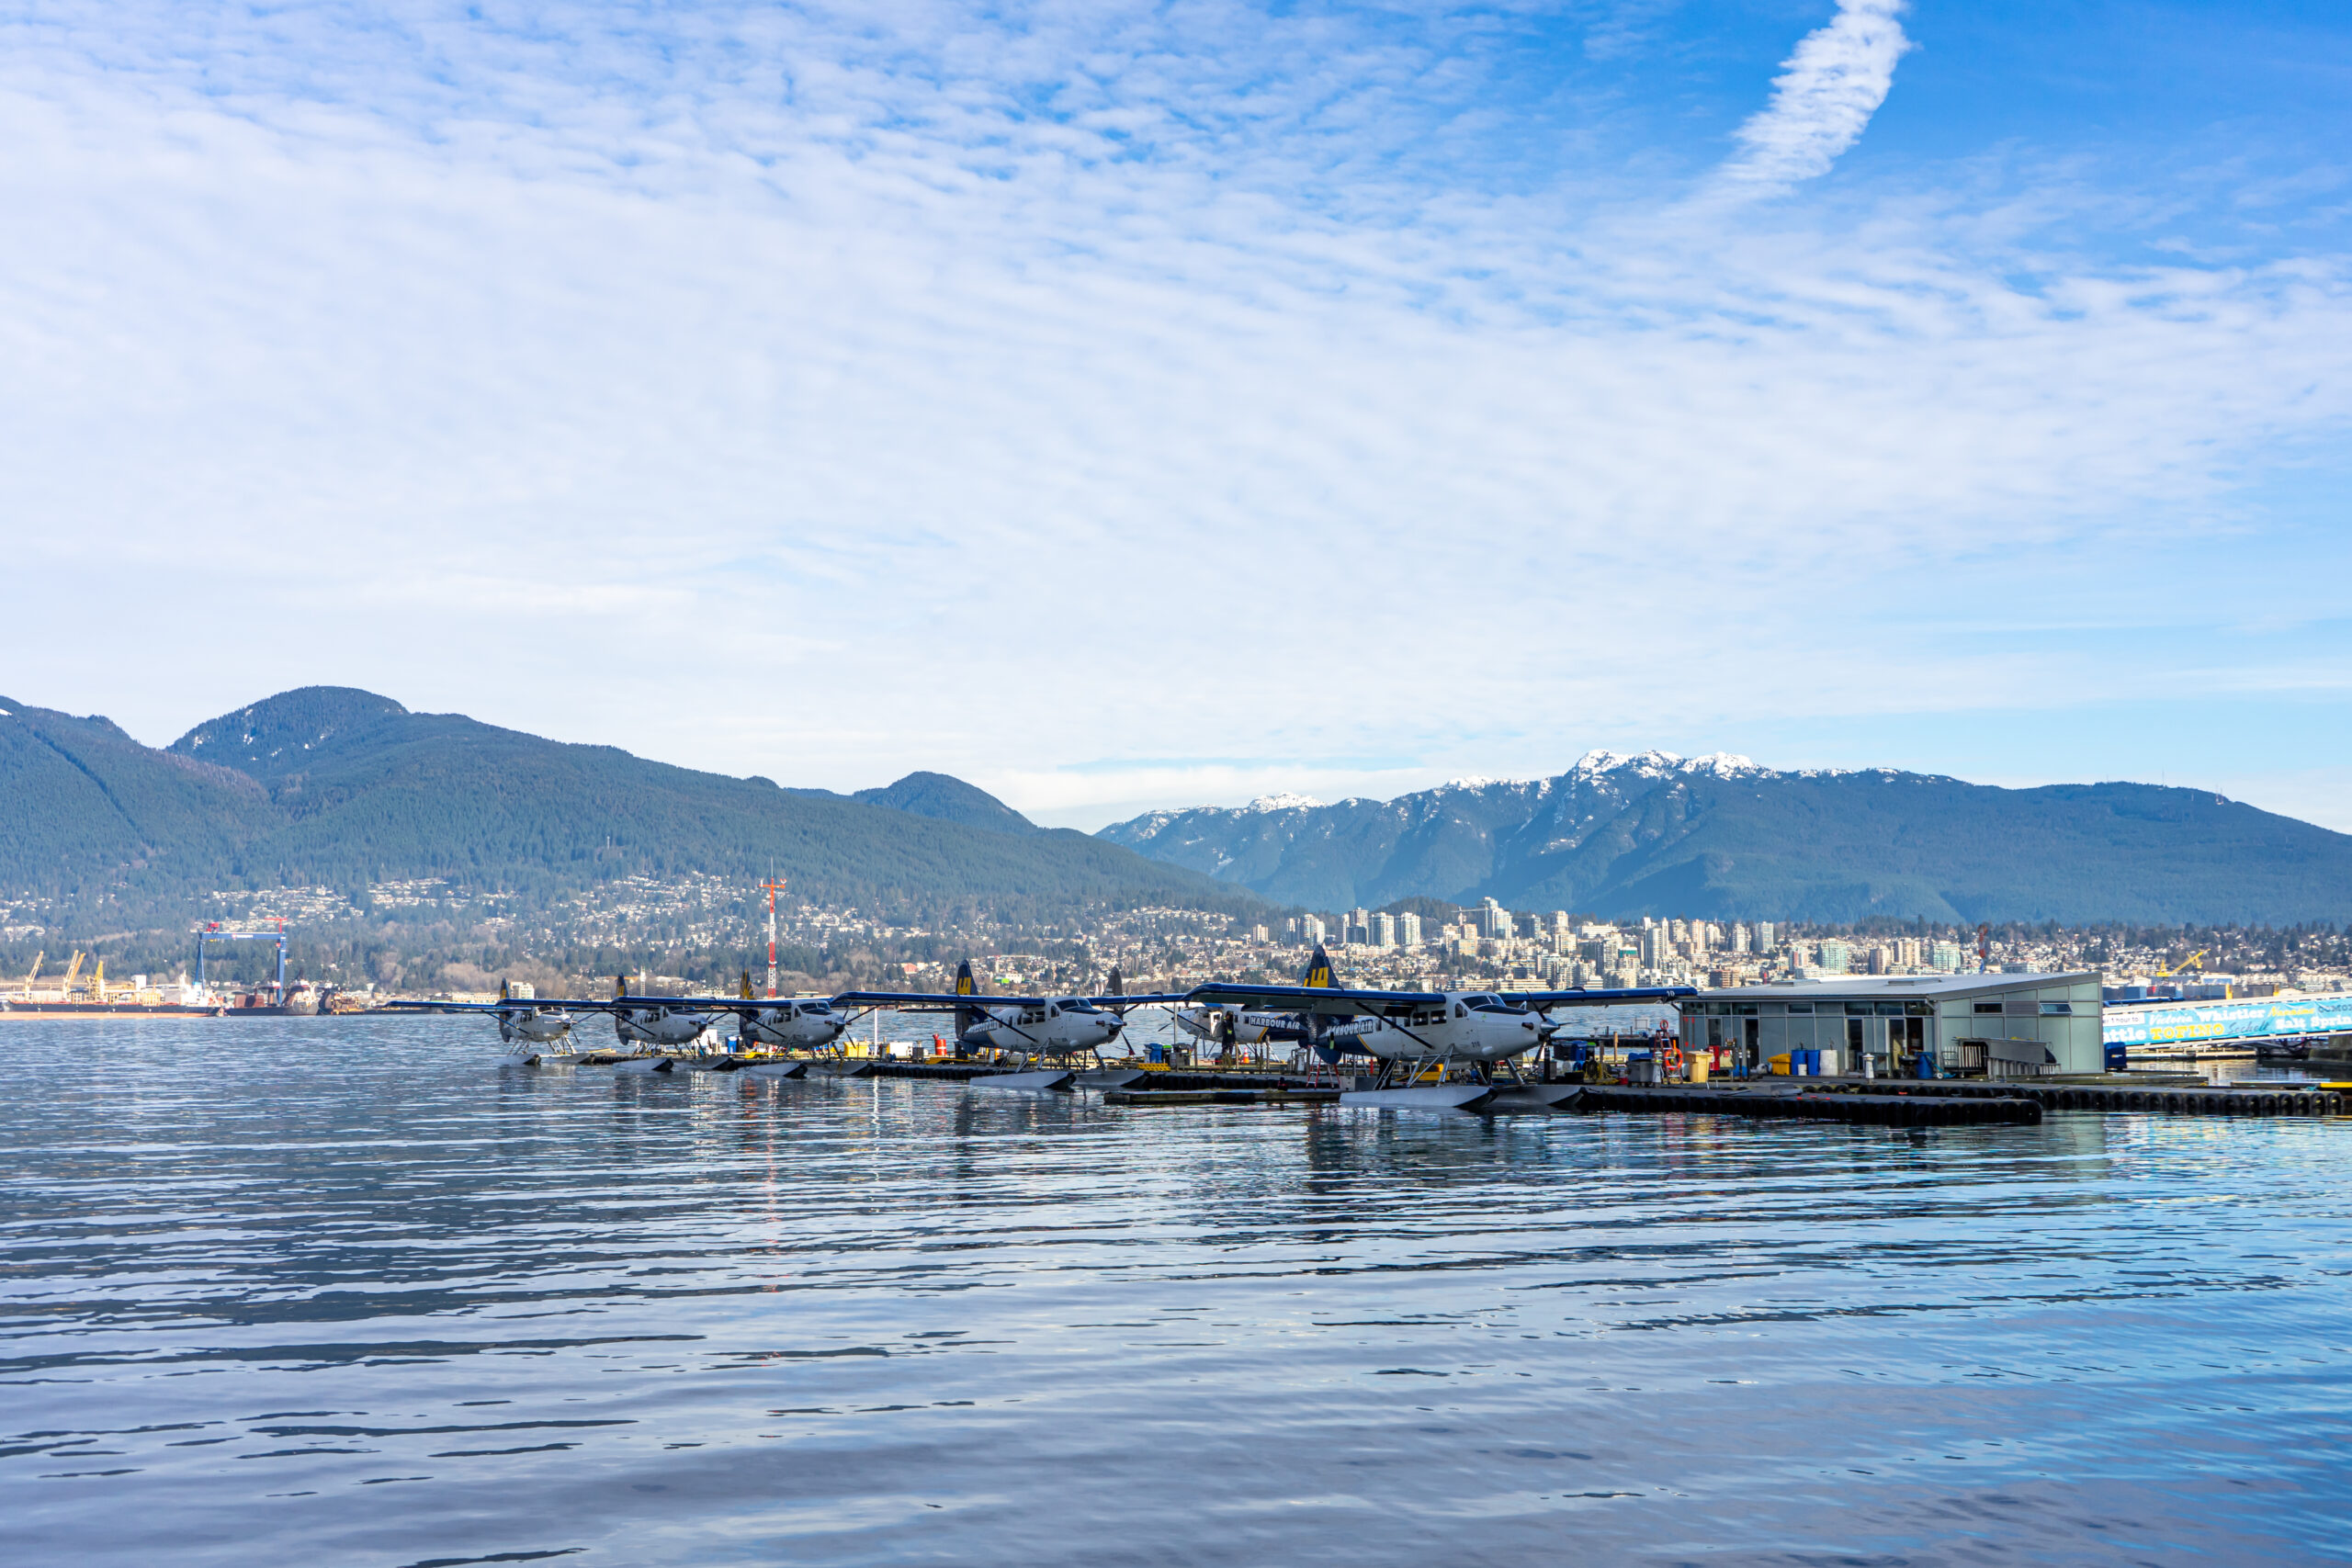 https://discovervancouvertours.com/wp-content/uploads/2022/12/©Lisanne_Smeele_Vancouver_Harbour_Air-scaled.jpg